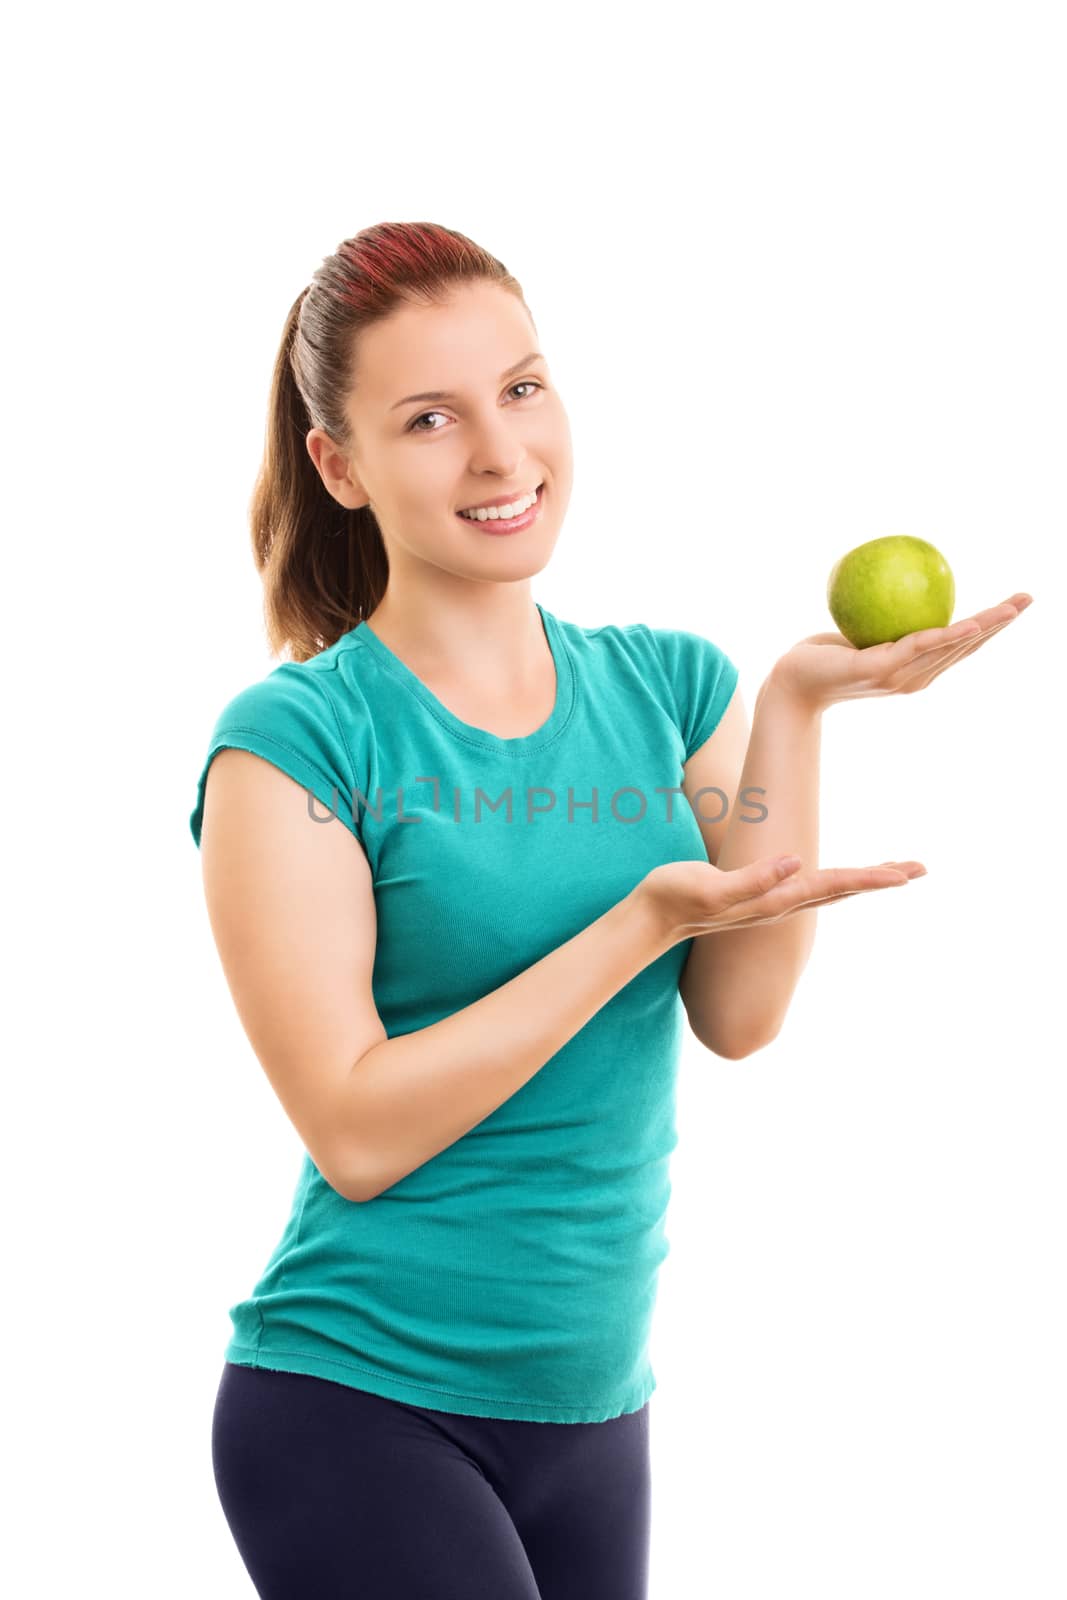 Have a bite? It's fresh and healthy. Smiling beautiful fit girl in fitness clothes holding and offering a green apple, isolated on white background.